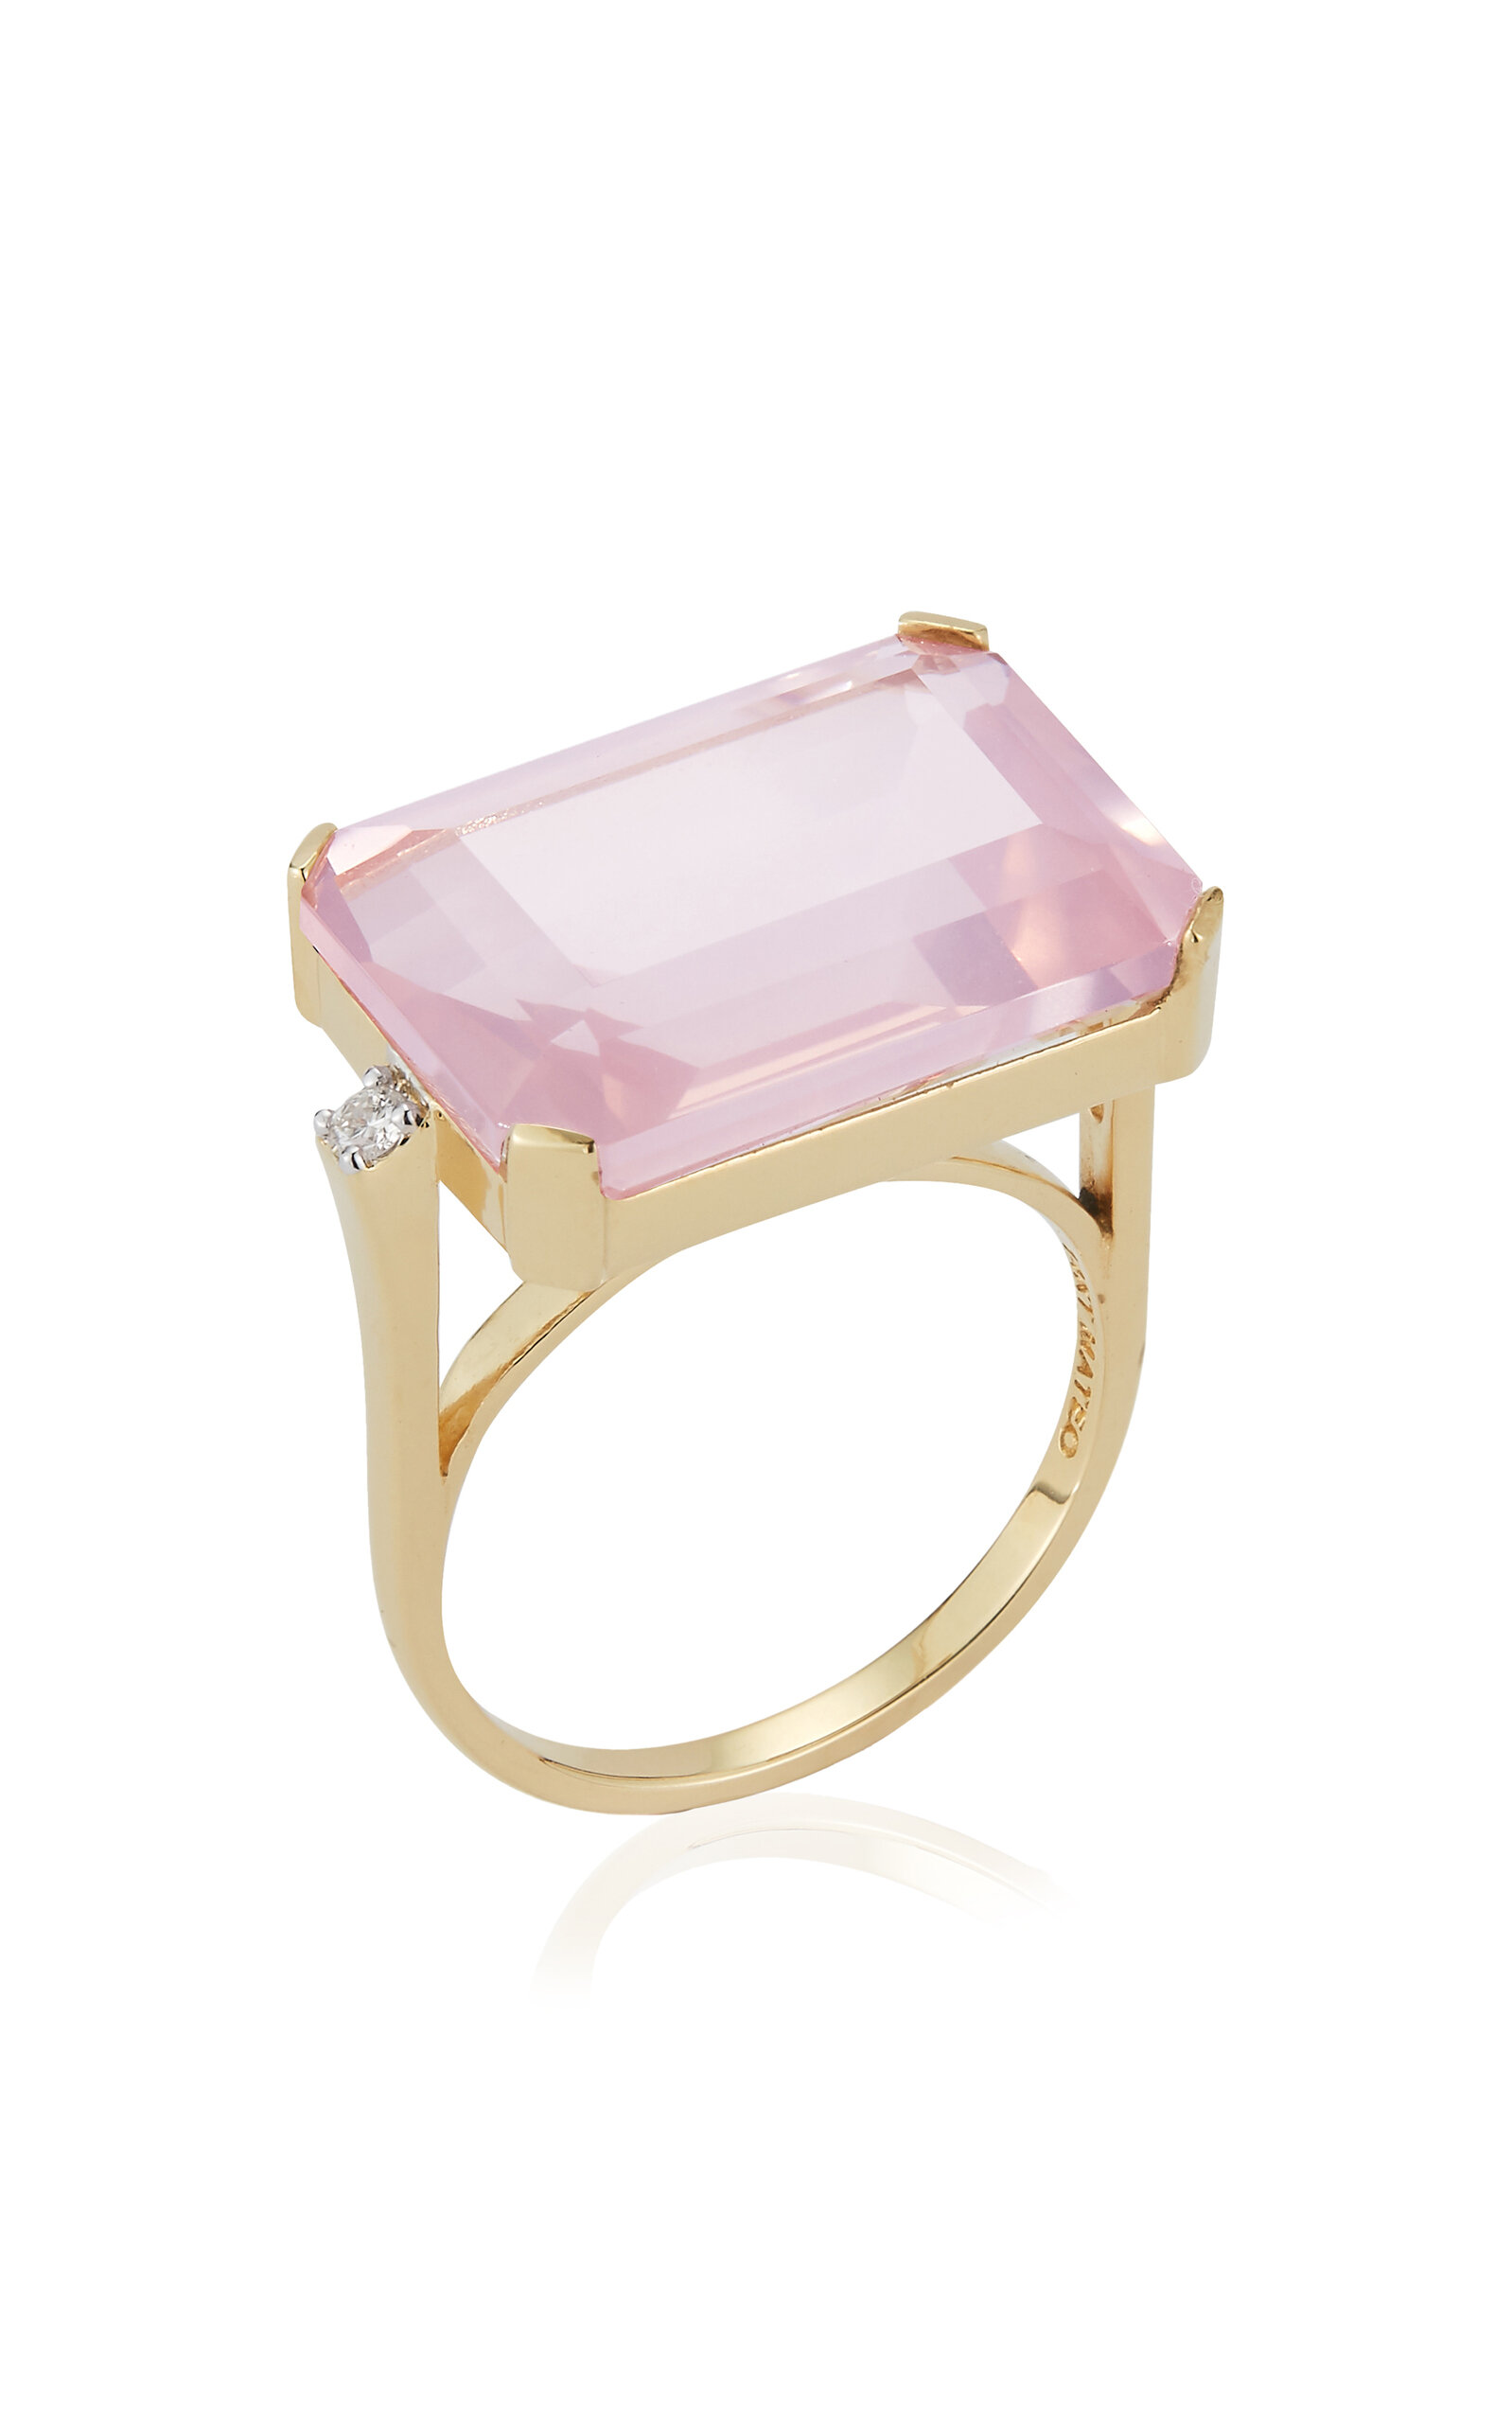 Mateo East West 14k Yellow Gold Quartz Ring In Pink